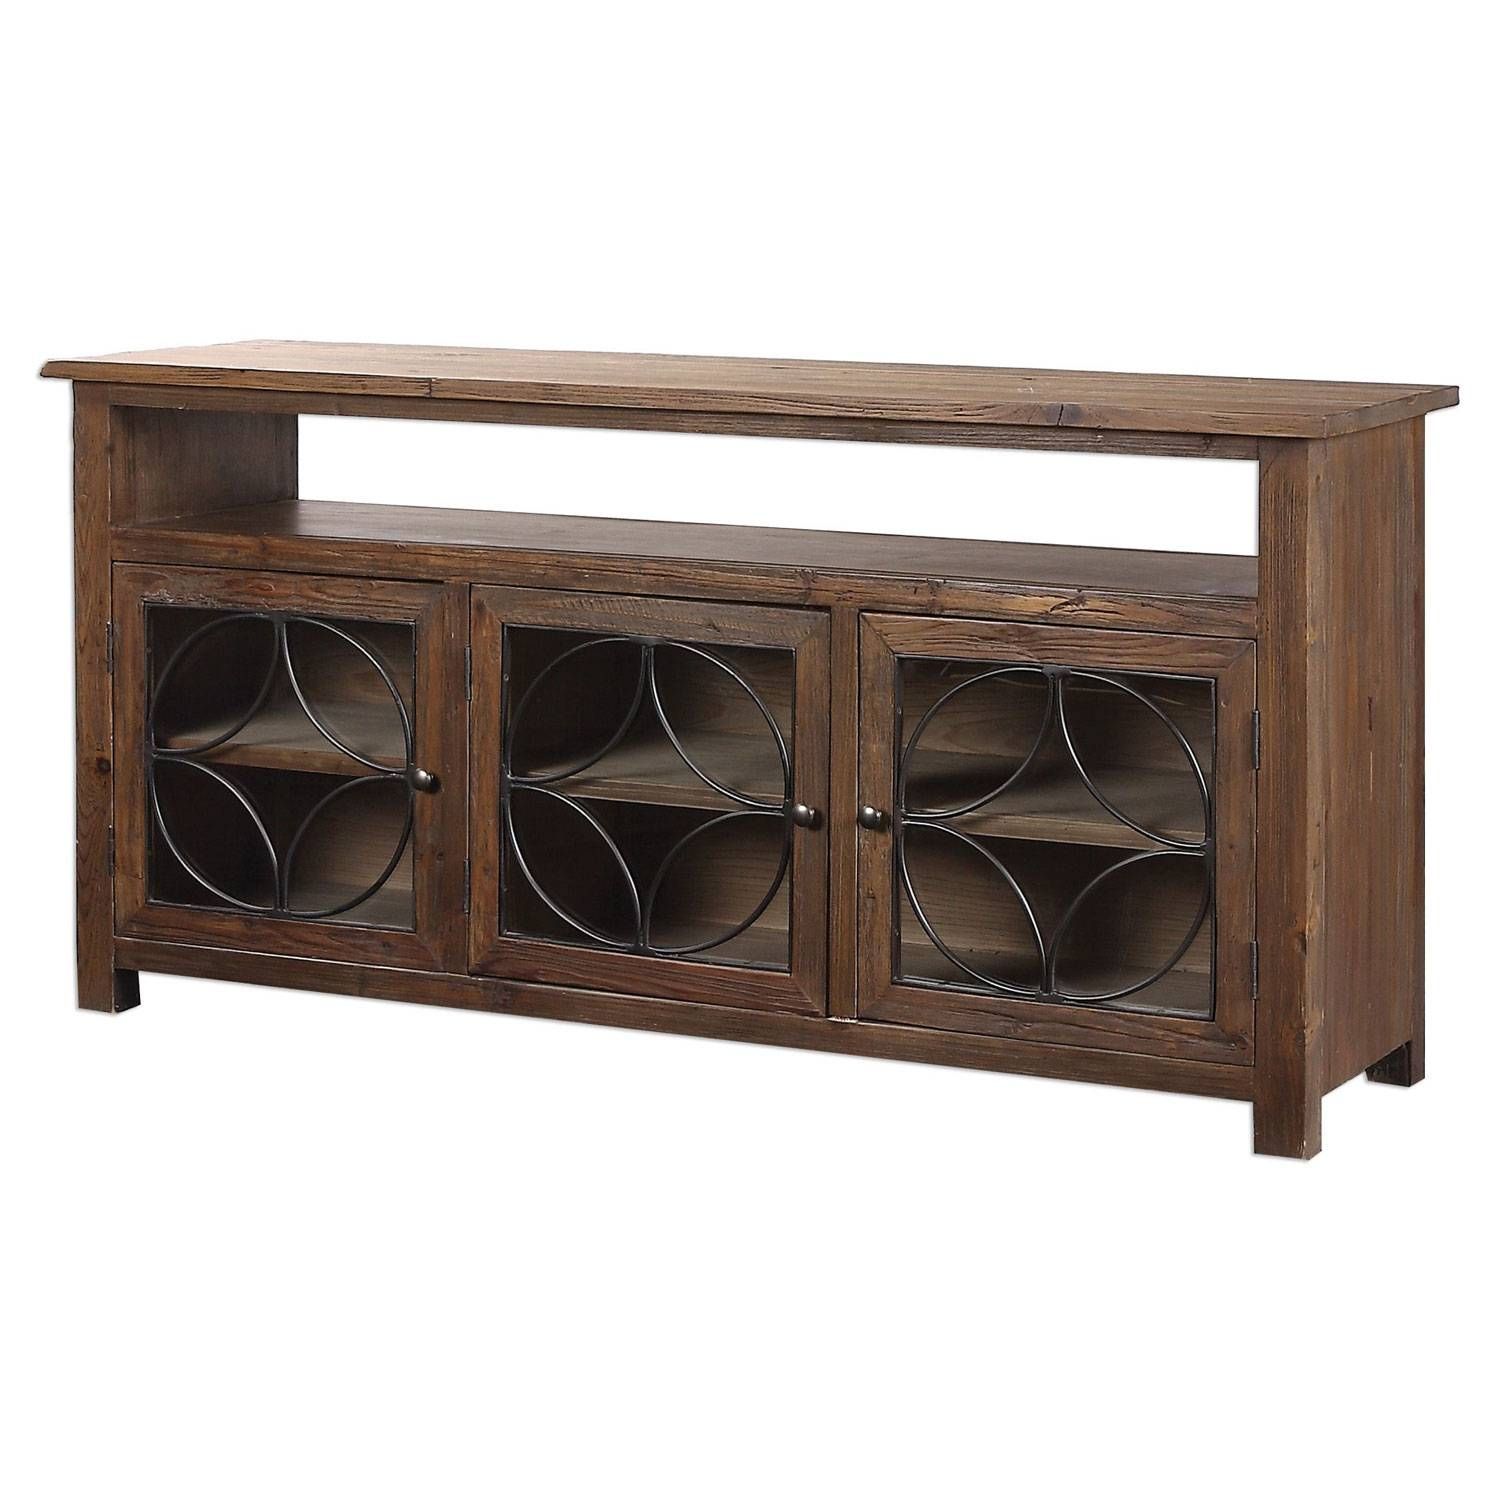 Buffets & Sideboards On Sale | Bellacor Throughout 48 Inch Sideboards (View 13 of 15)